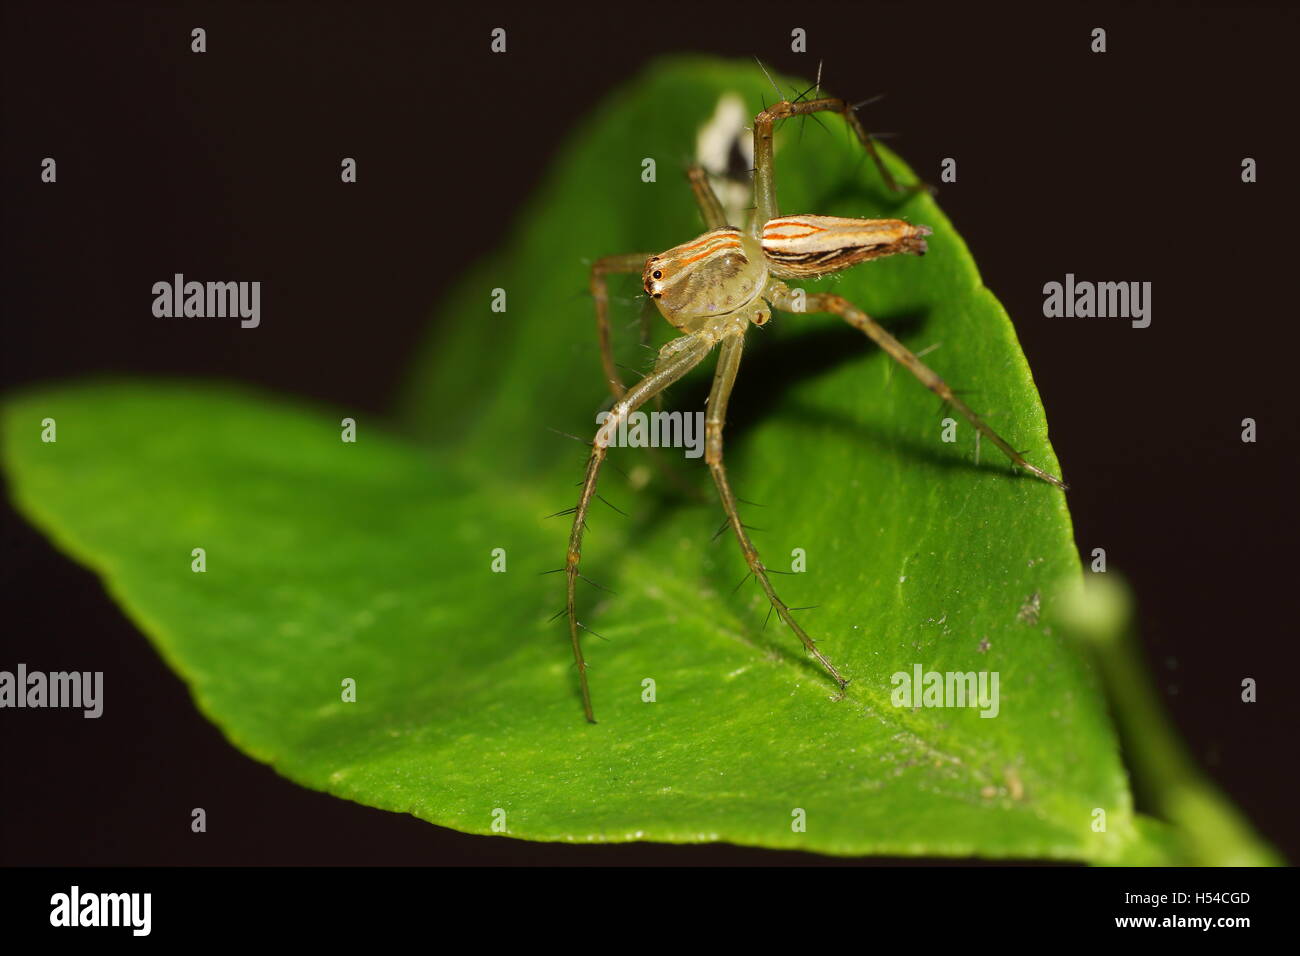 Female lynx spider on a defense stance on a leaf. Stock Photo